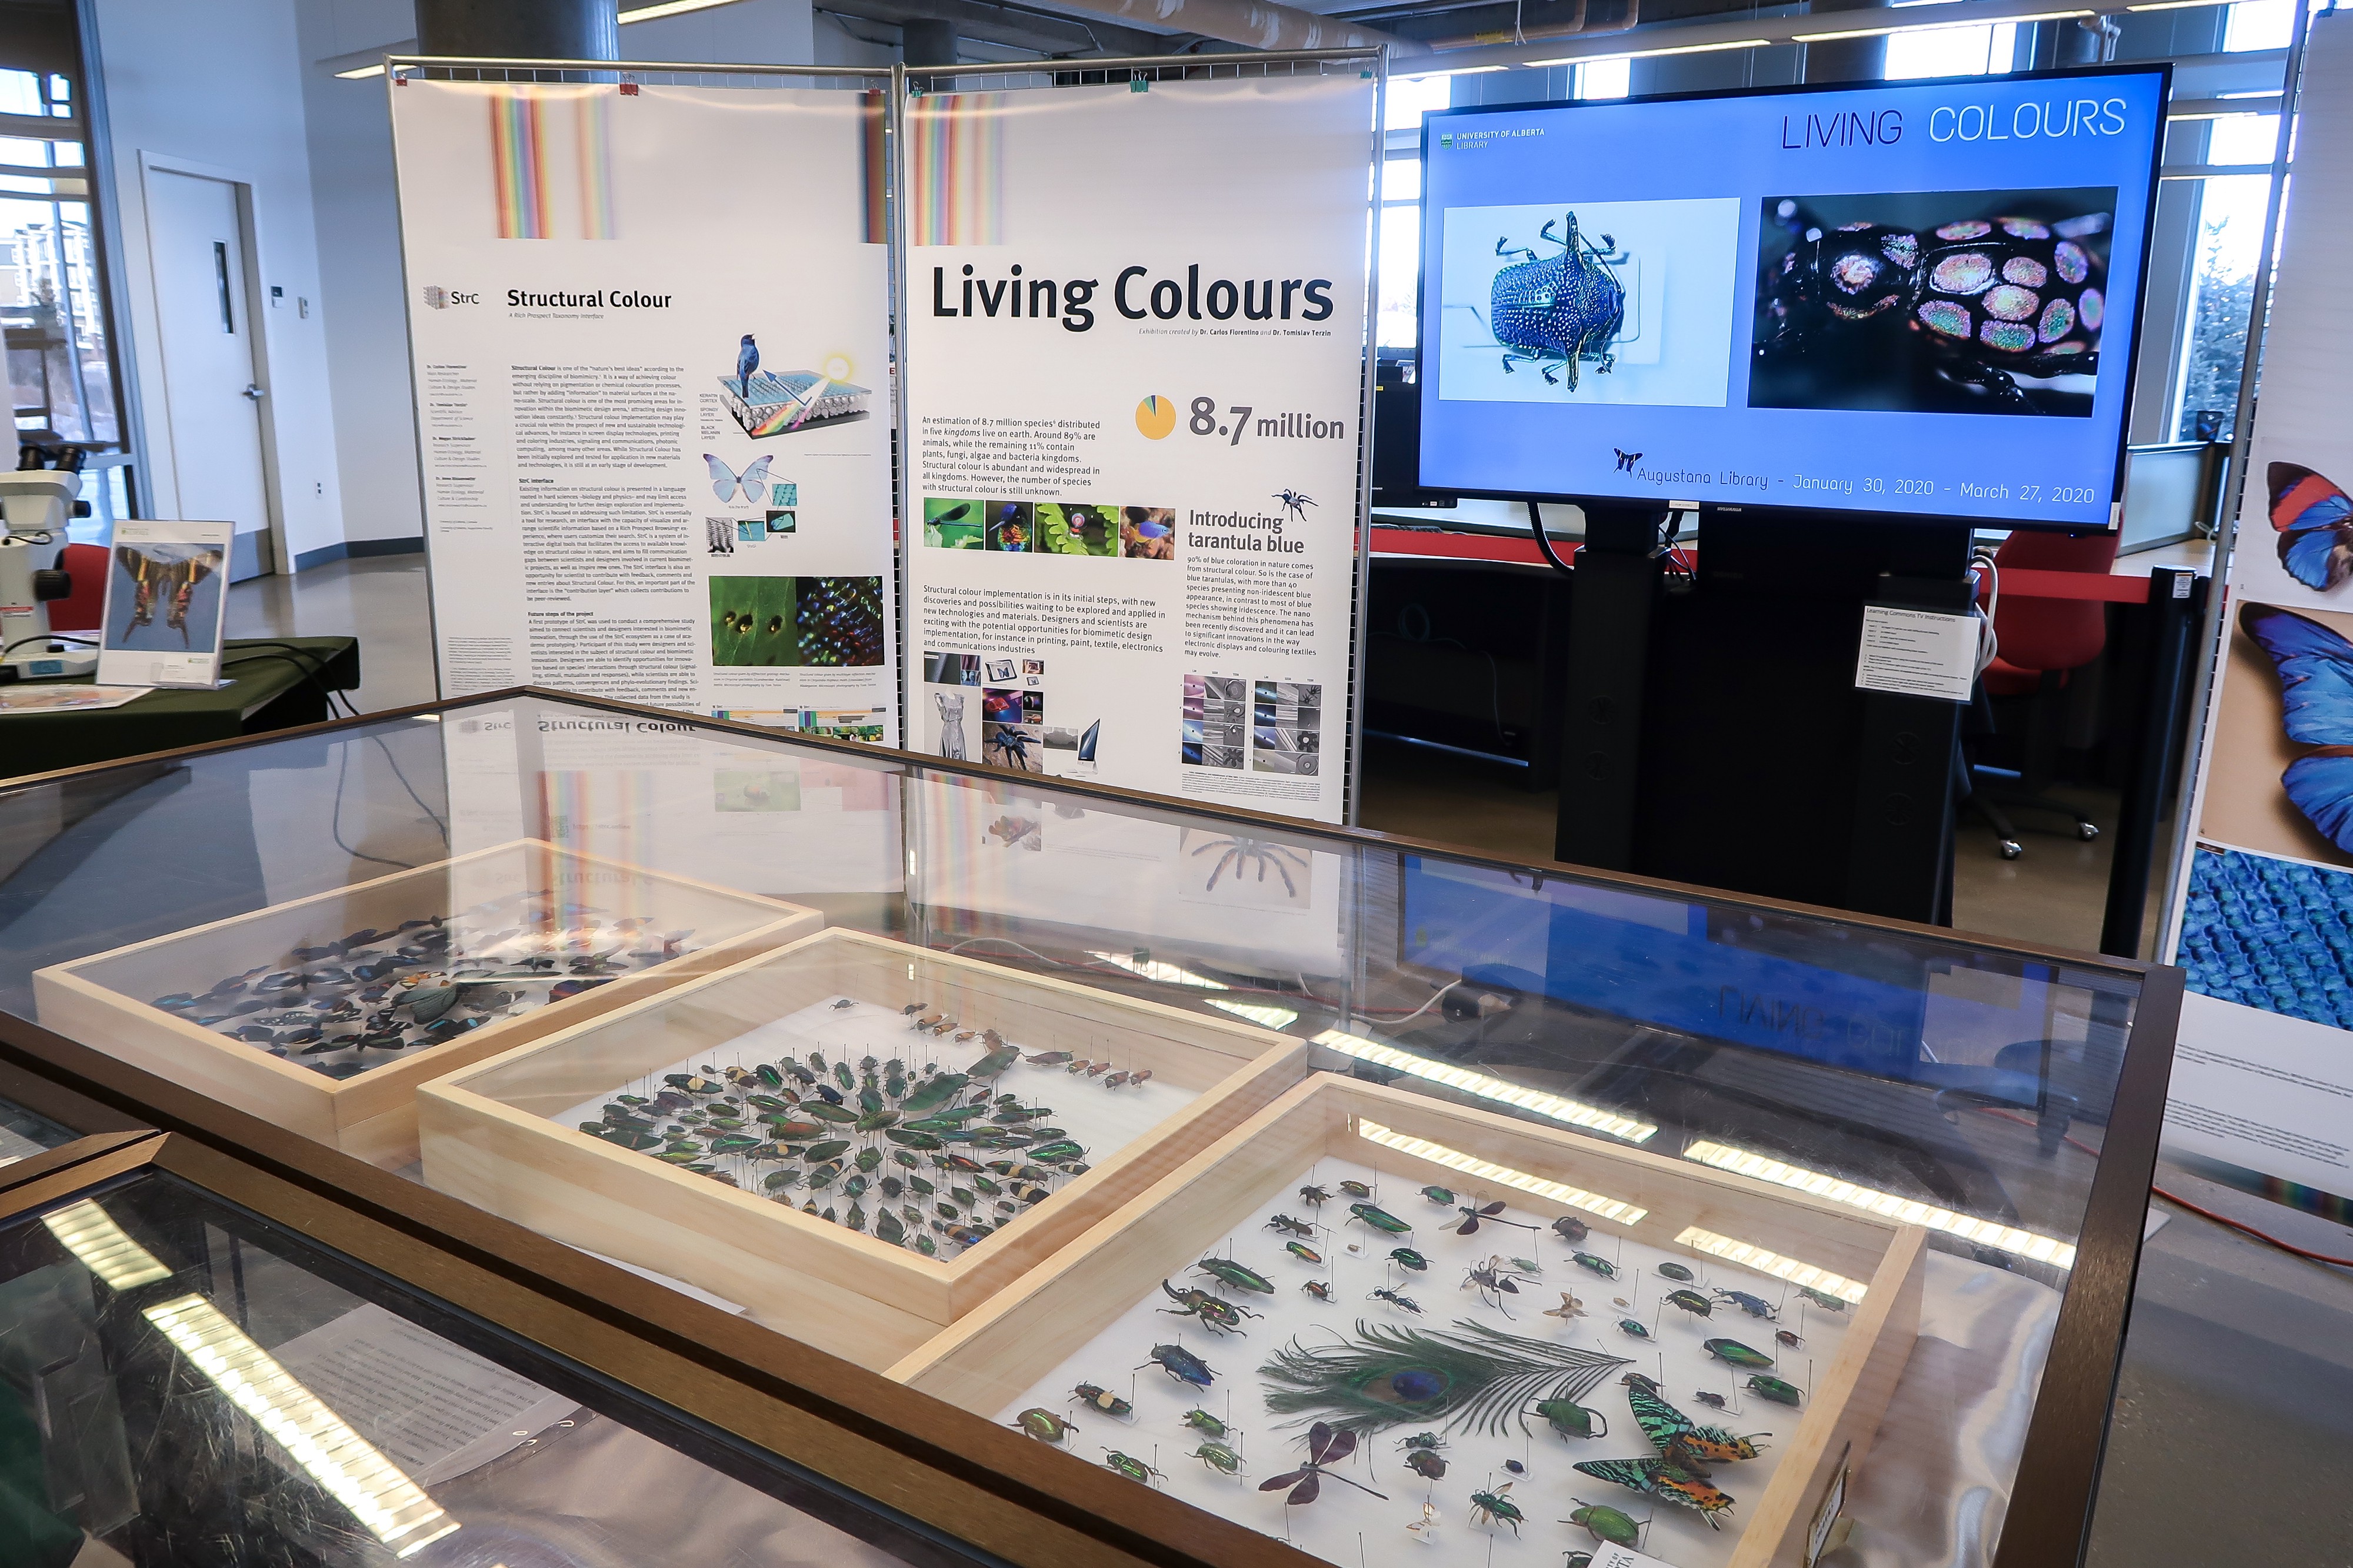 Augustana Library's Living Colours Exhibition